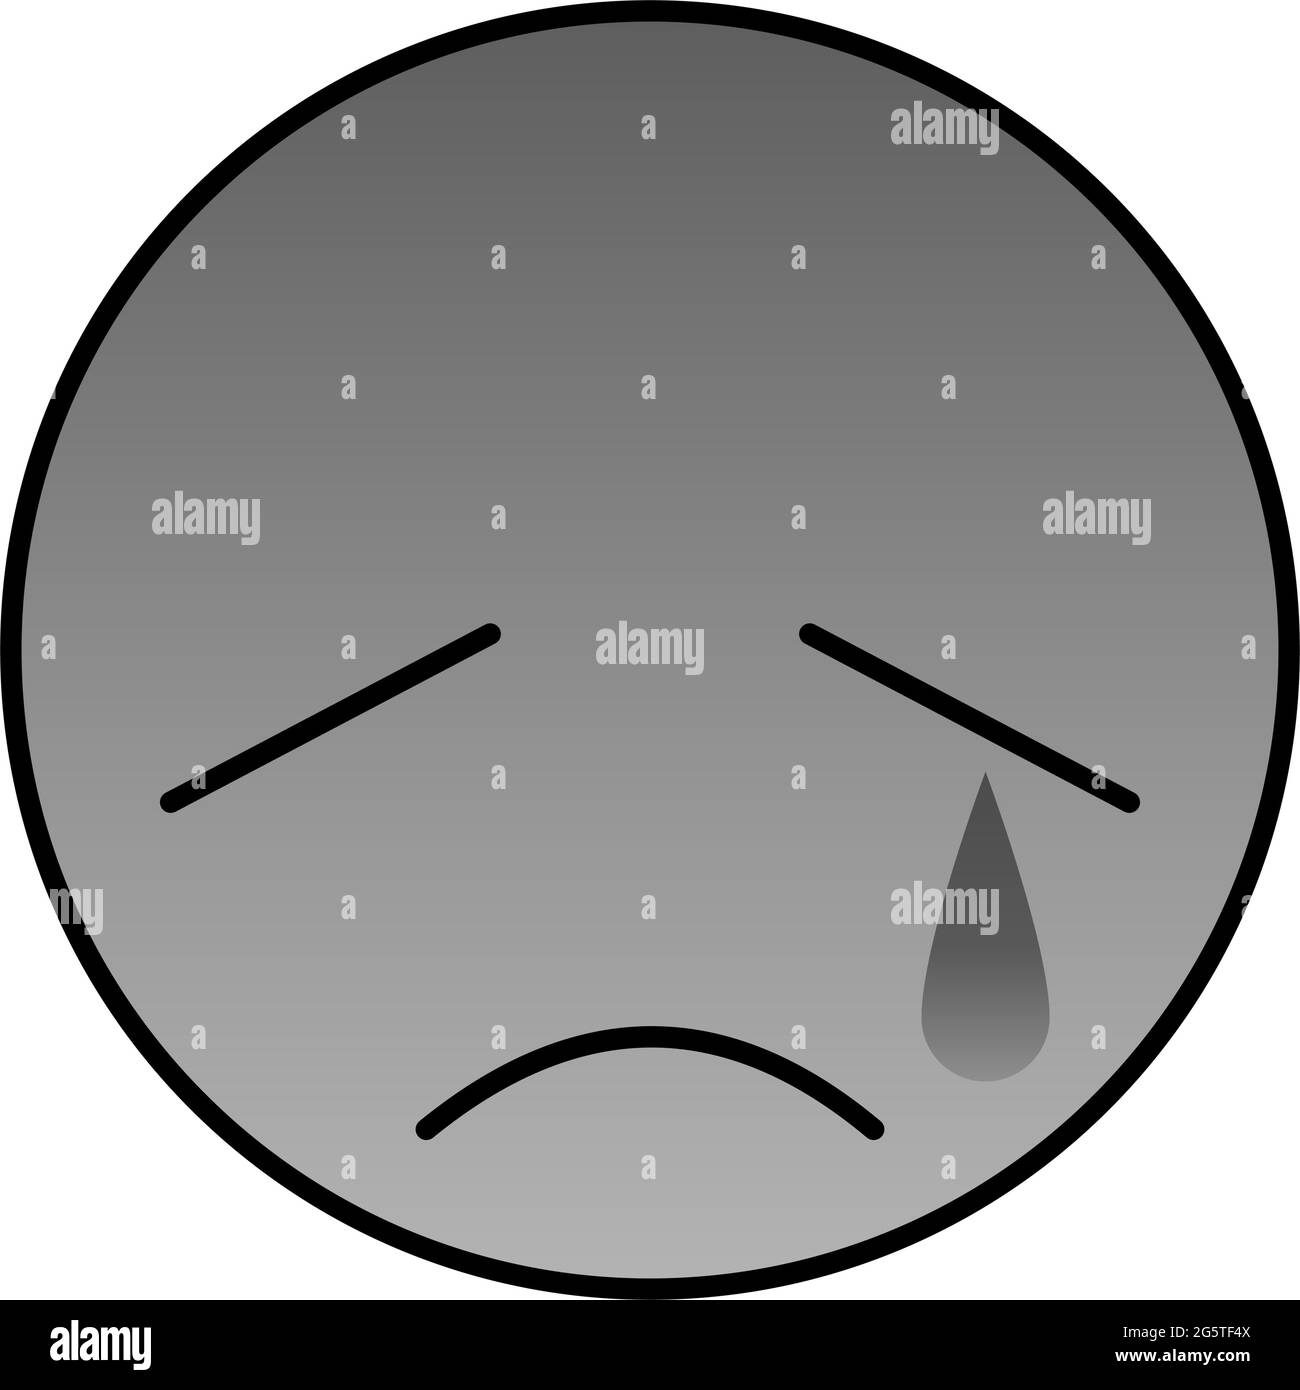 Sad emotional face in grayscale with teardrop 06 Stock Vector